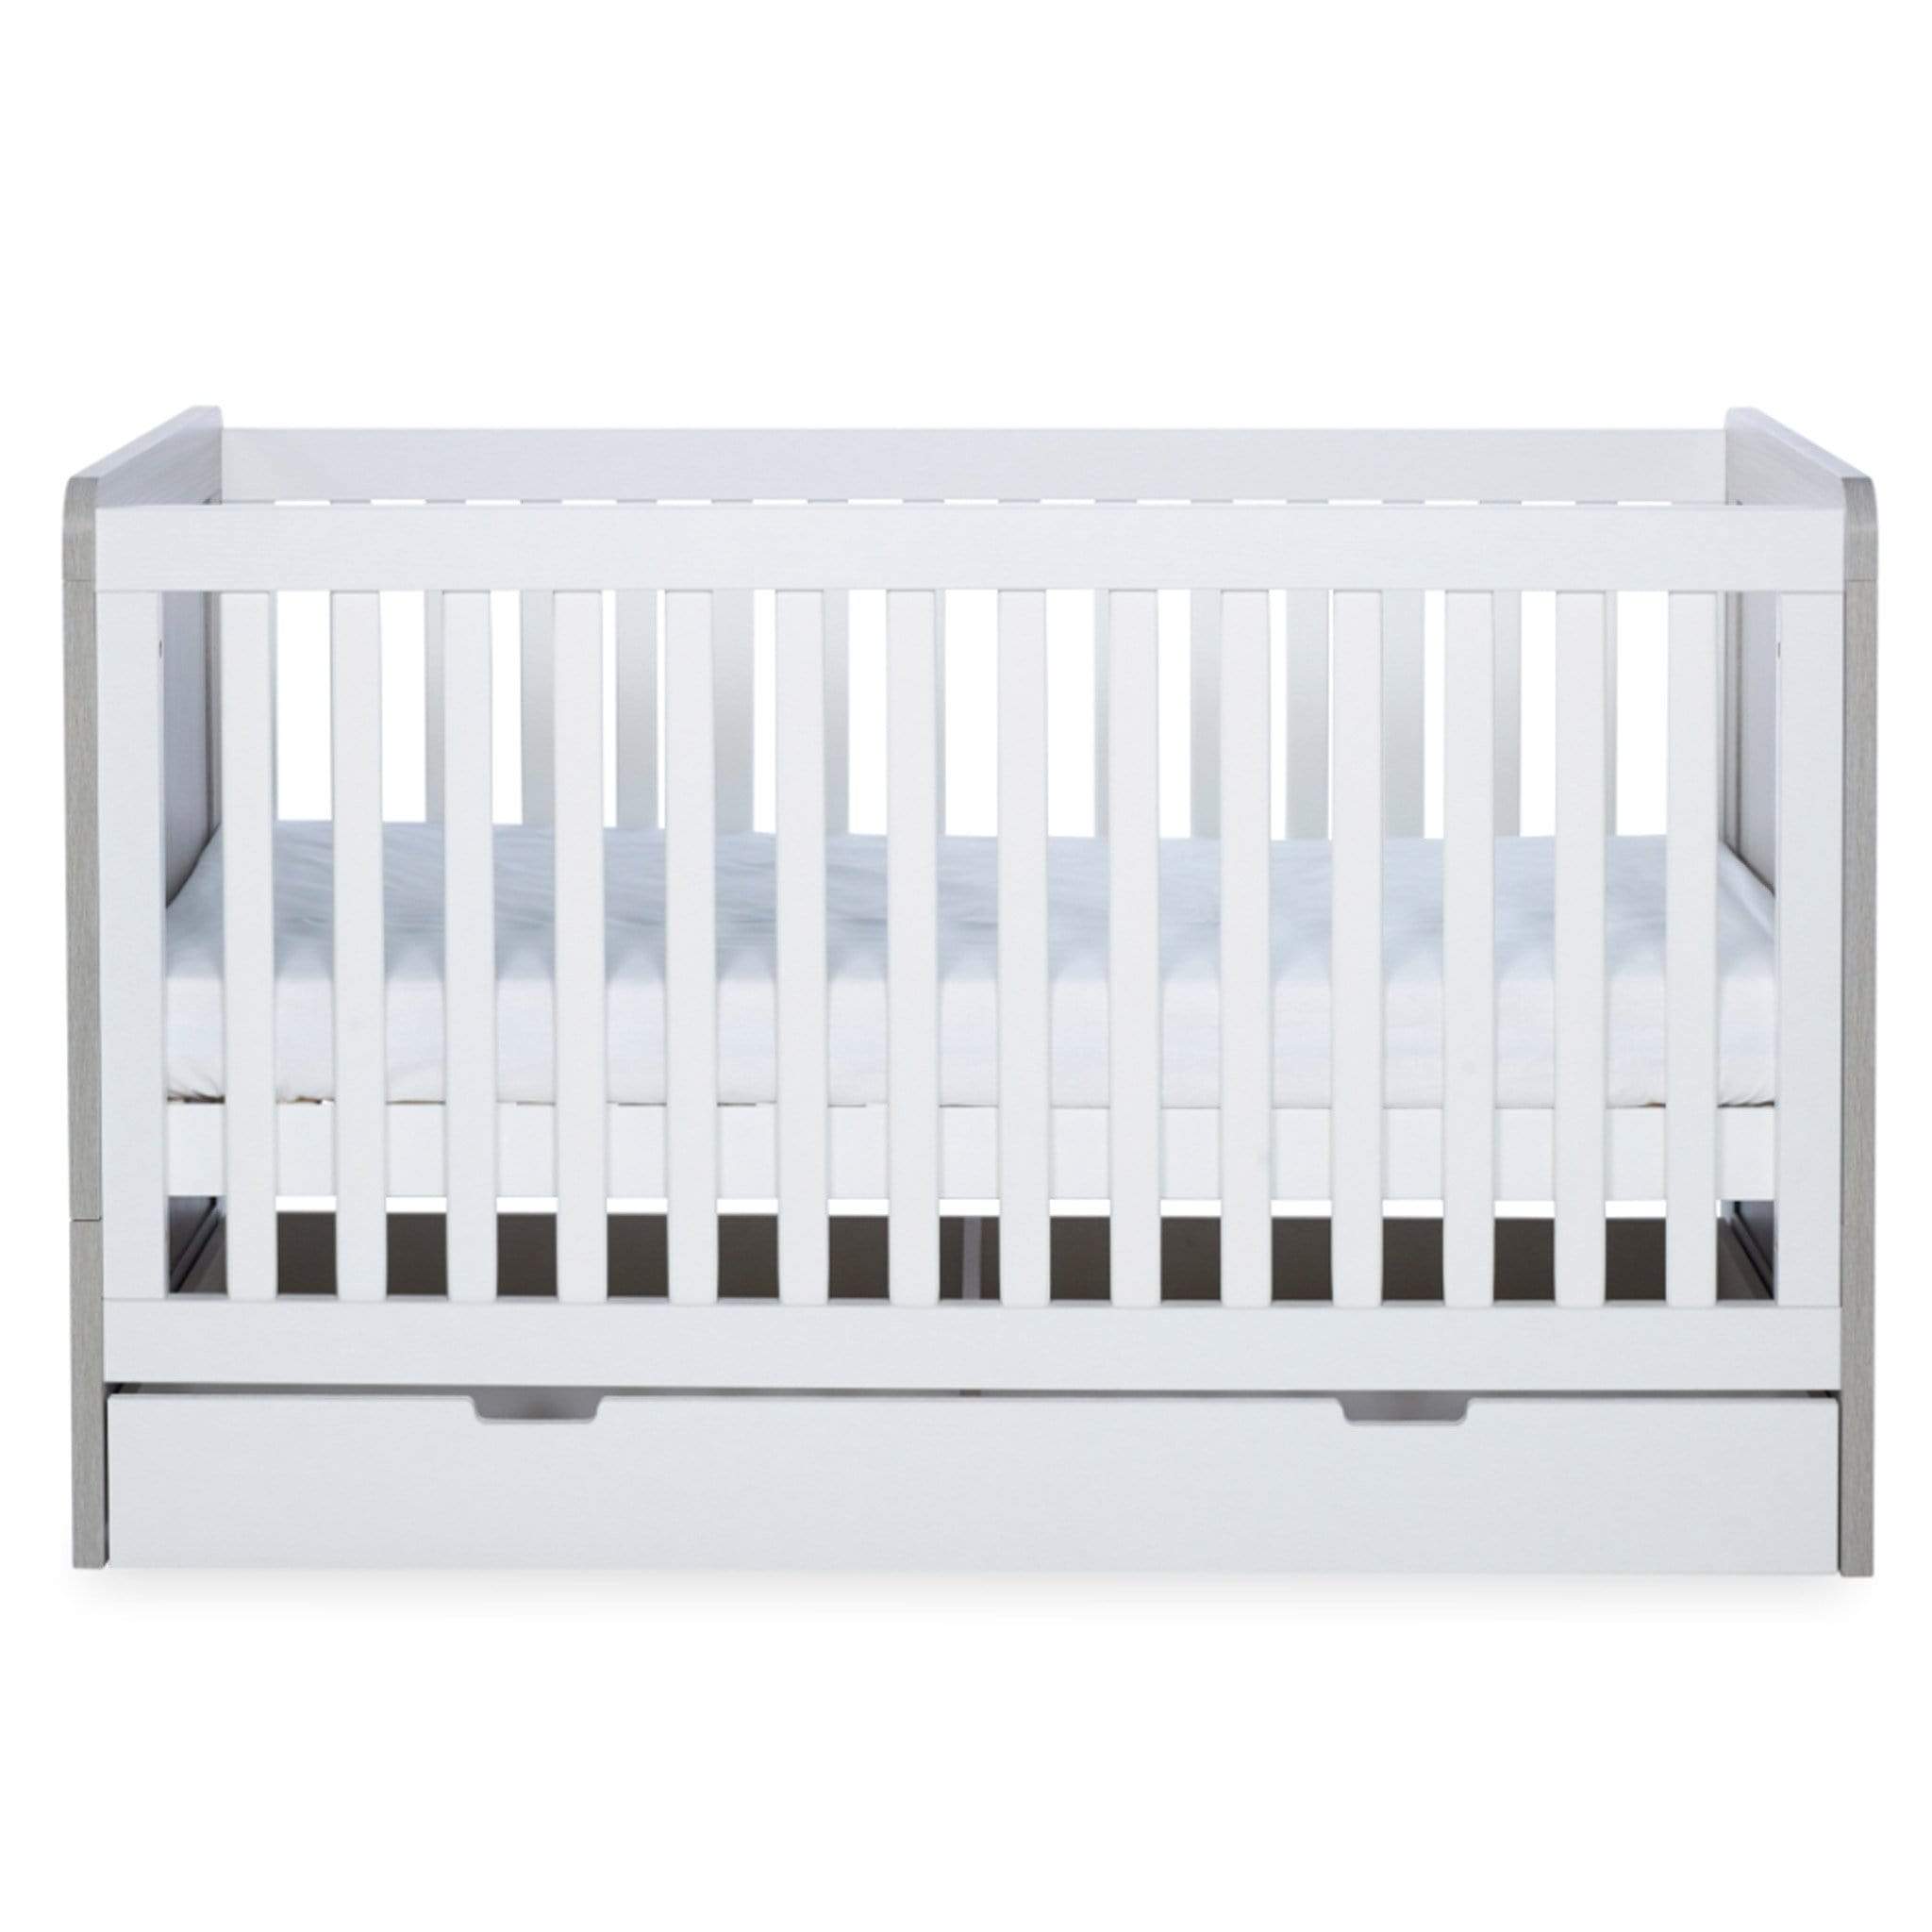 Ickle Bubba cot bed room sets Ickle Bubba Pembrey 3 Piece Nursery Room Set & Under Drawer Ash Grey & White